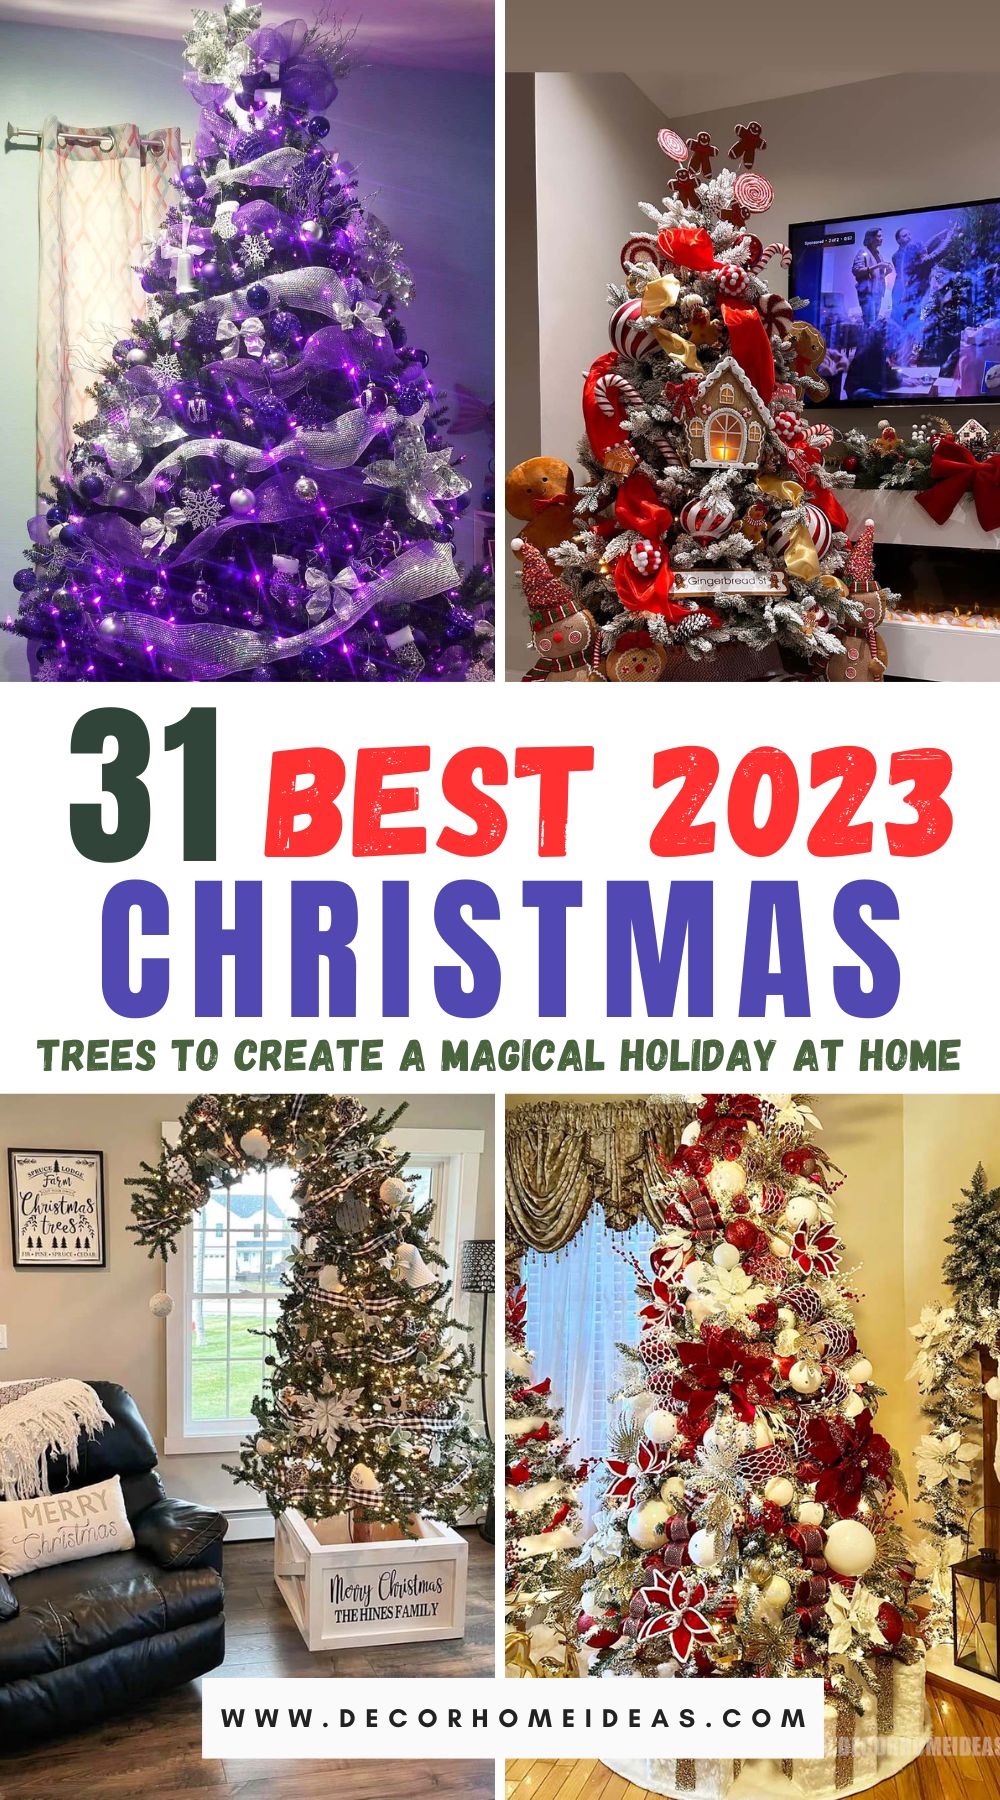 Spark joy this Christmas with the 31 most attractive Christmas trees of 2023! From classic elegance to modern marvels, discover the tree trends that will transform your holiday into a season of enchantment.